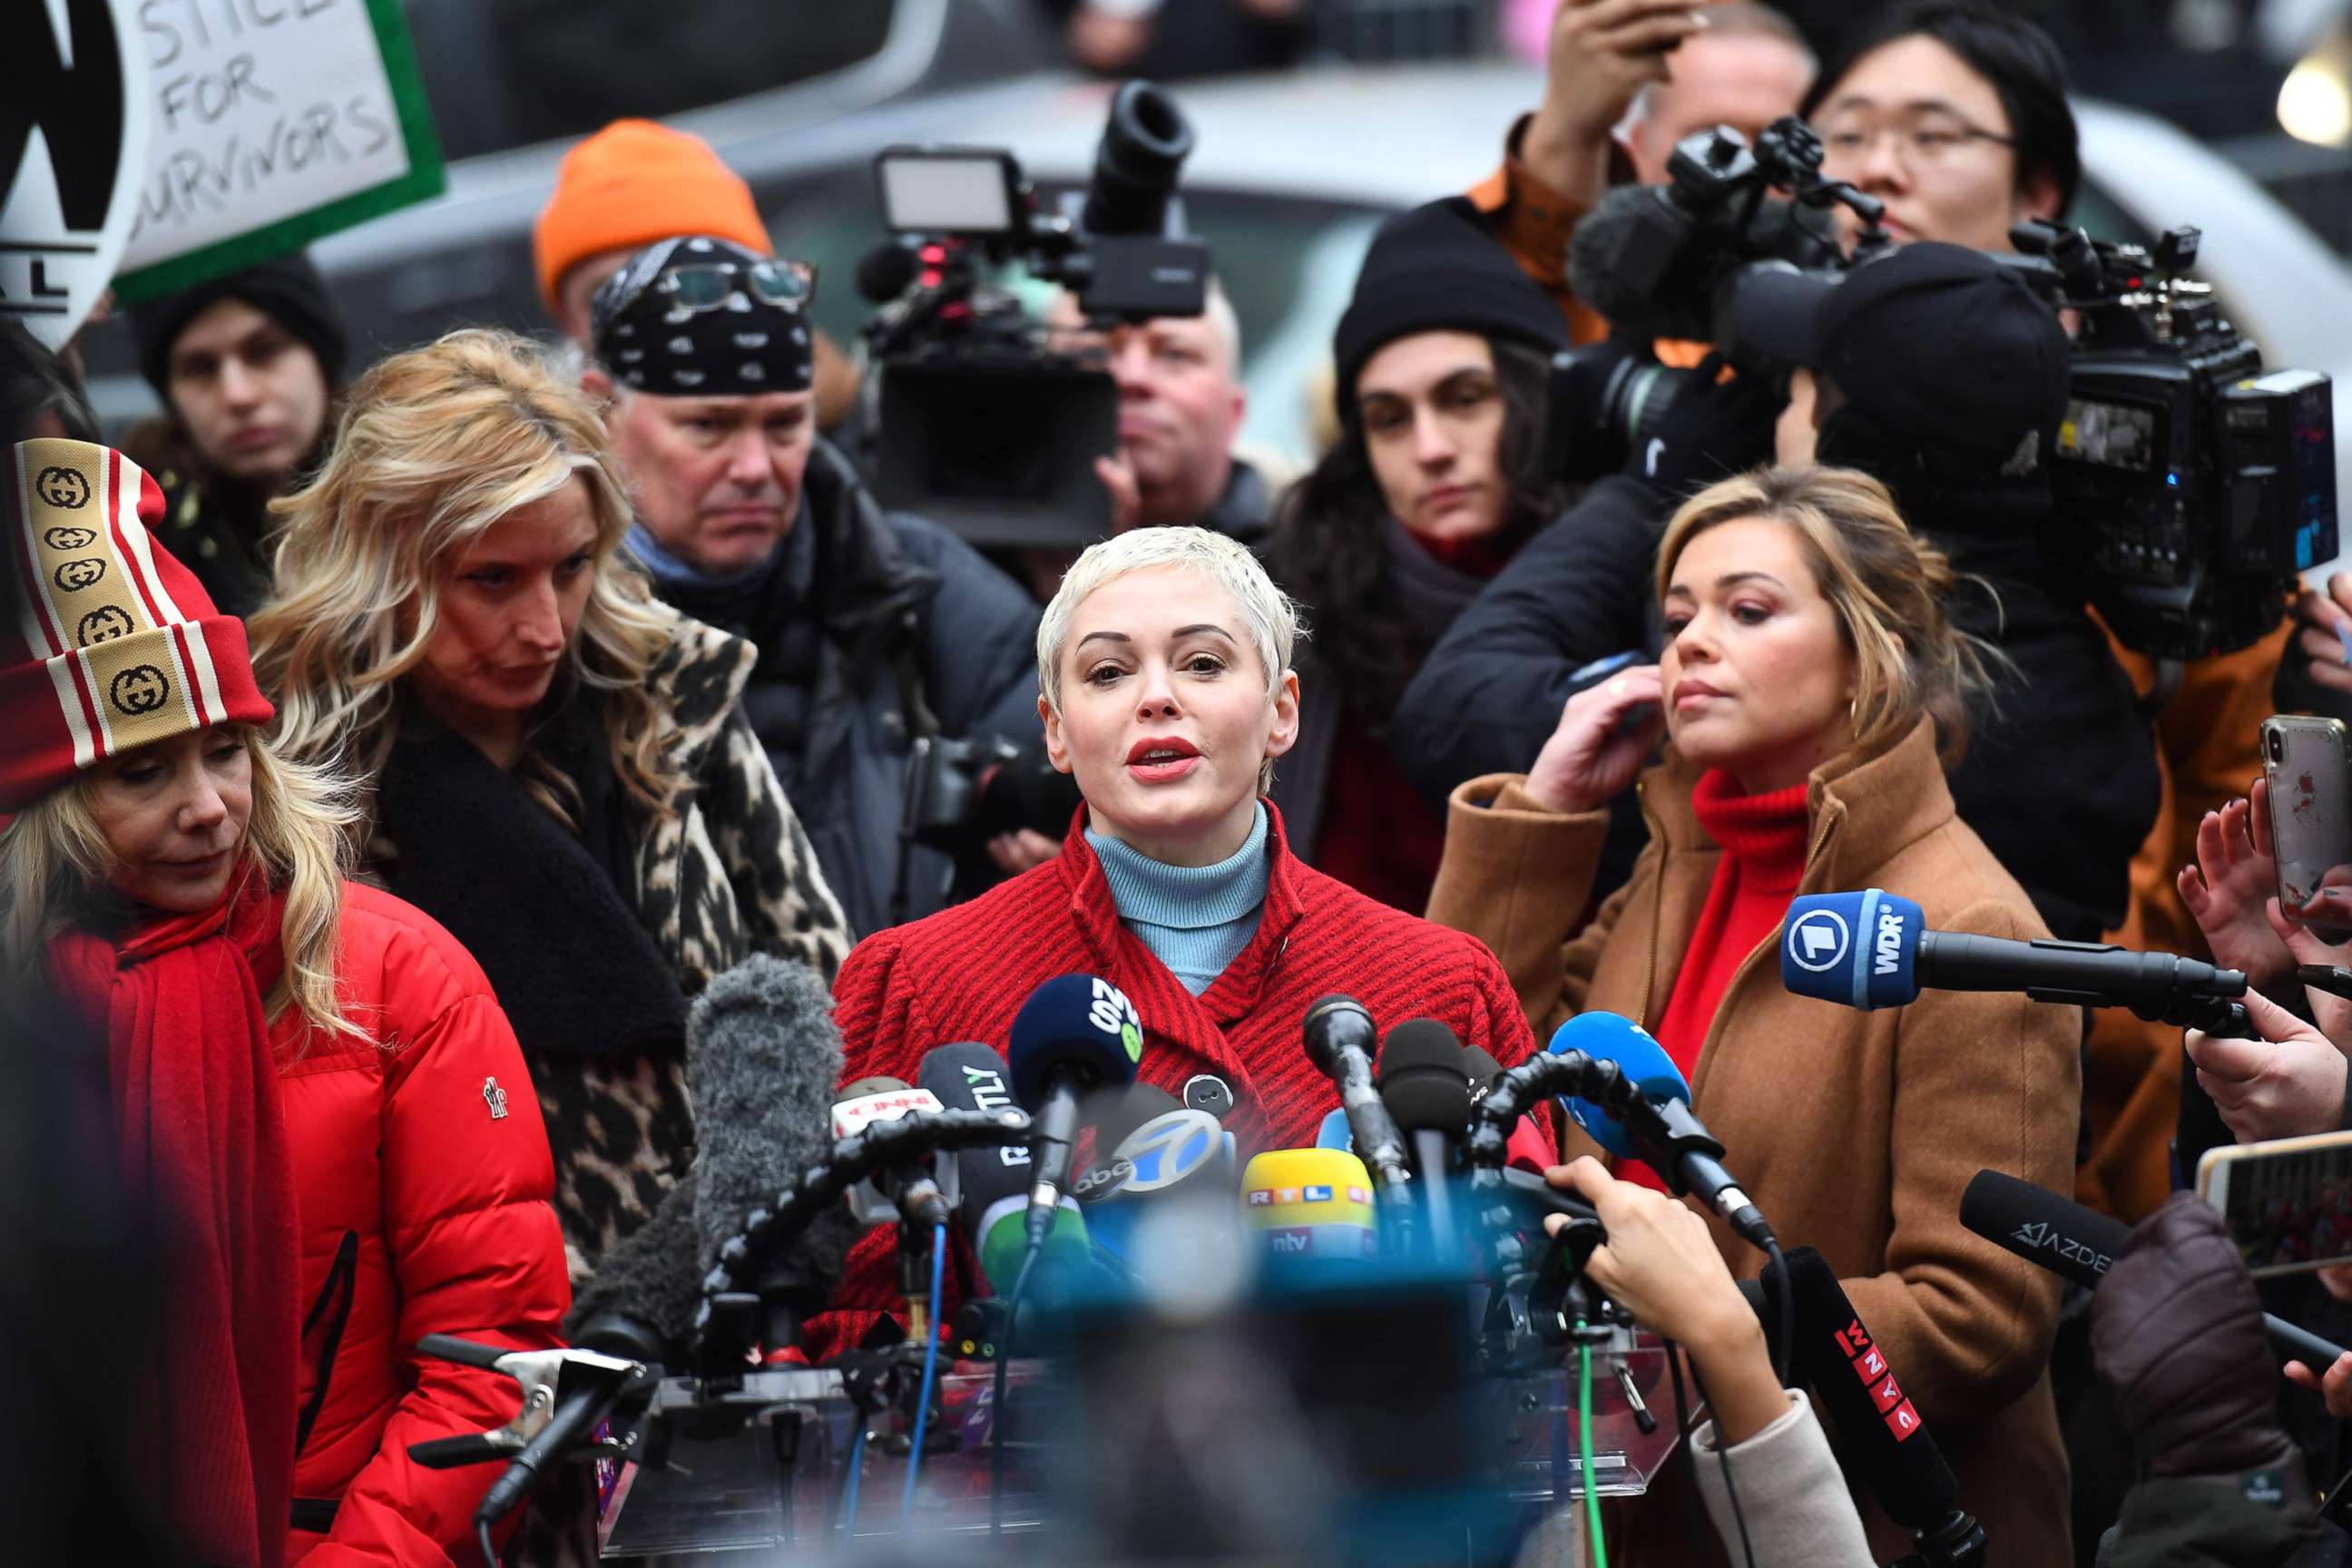 PHOTO: Rose McGowan speaks during a press conference, after Harvey Weinstein arrived at State Supreme Court, Jan. 6, 2020, on the first day of his criminal trial on charges of rape and sexual assault in New York.